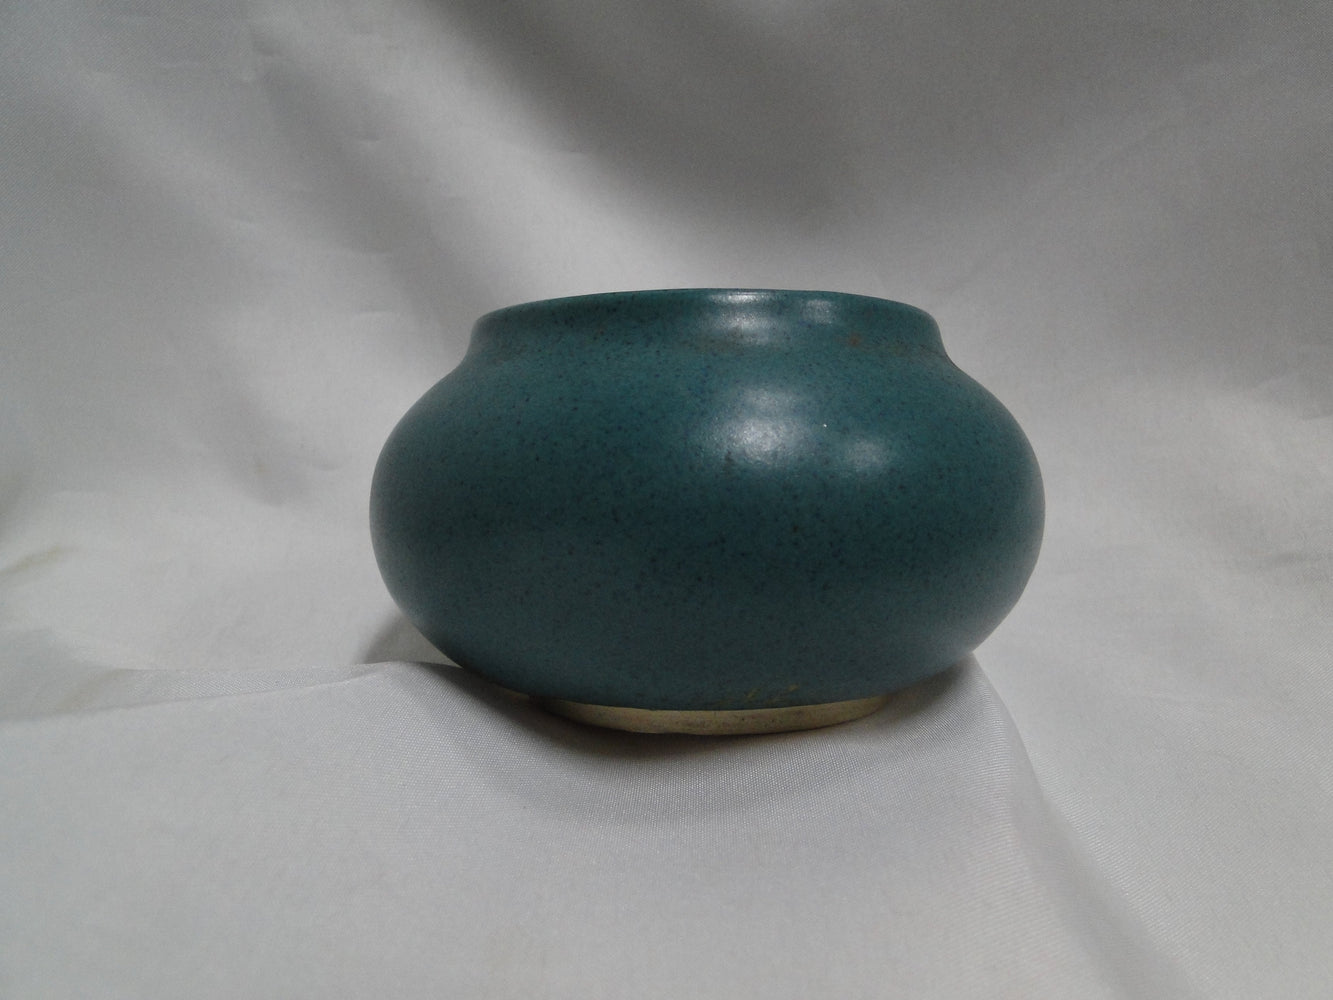 Walt Glass Pottery Teal: Votive Candle Holder, 2 1/2" Tall, All Over Teal